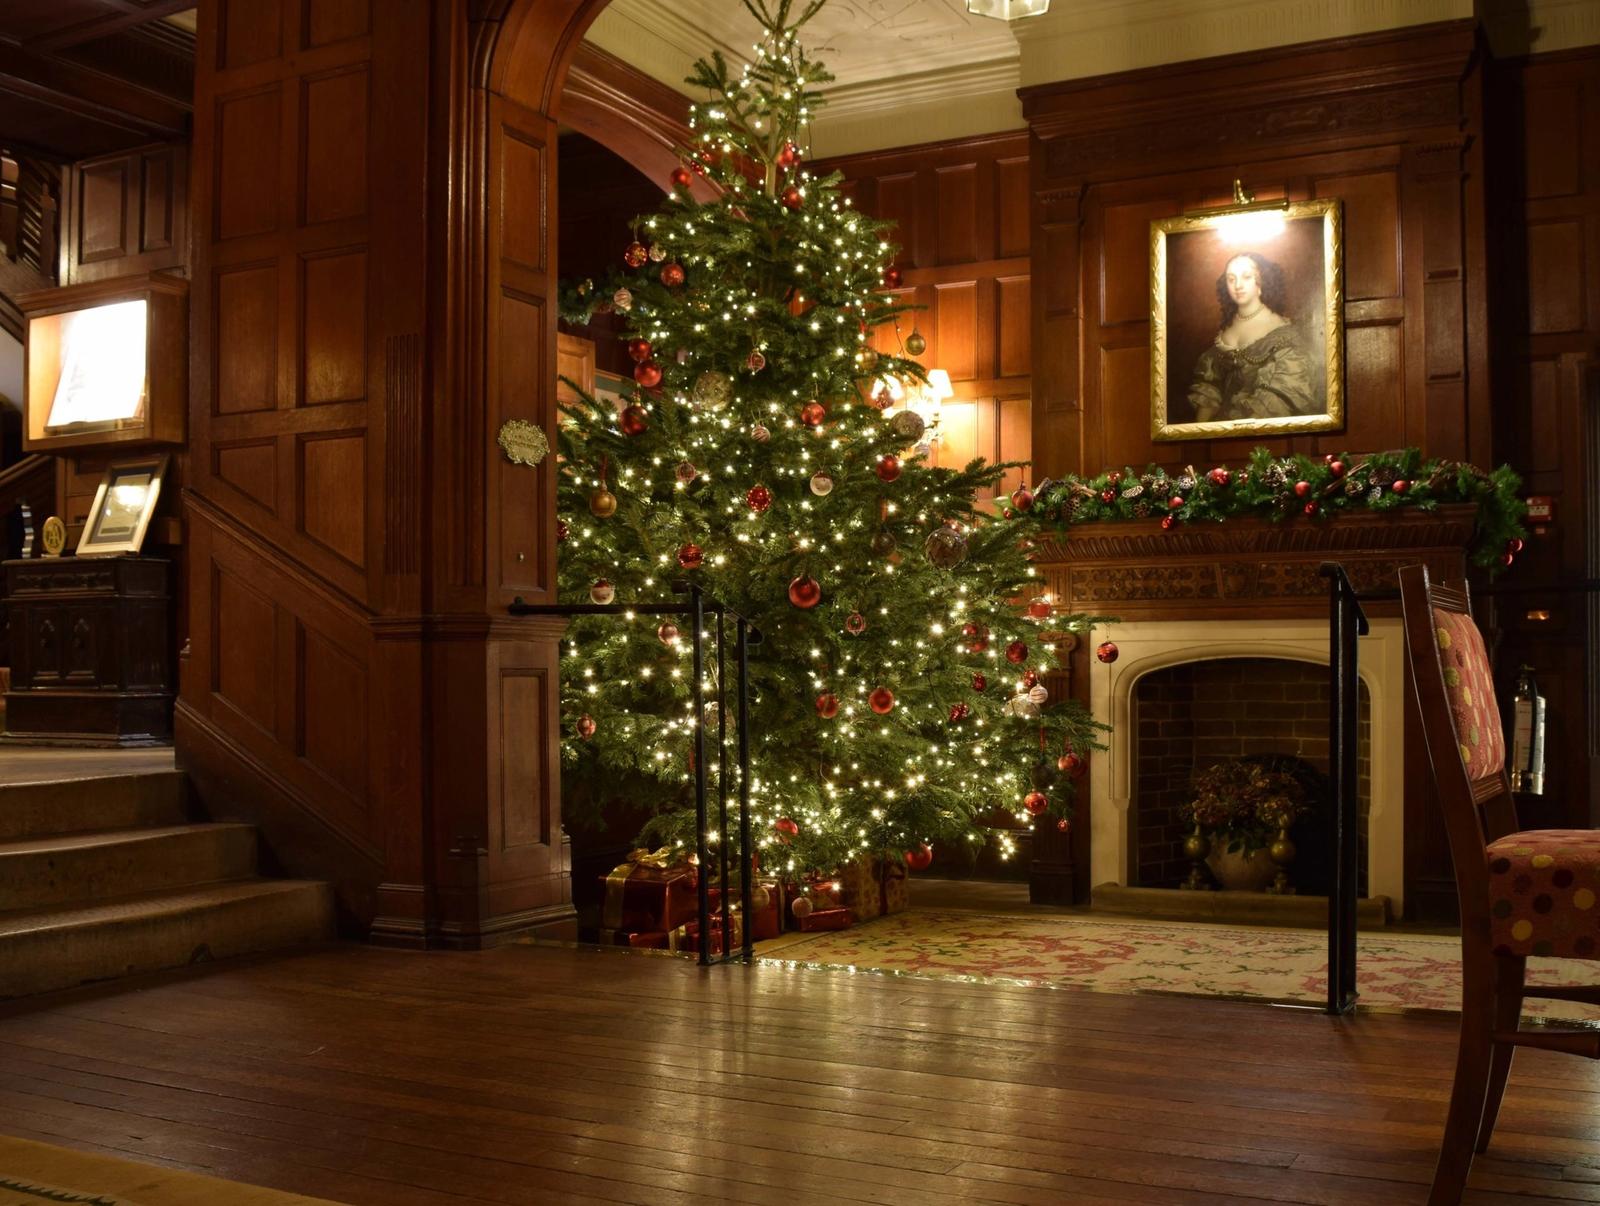 Hotels for Christmas in Sussex